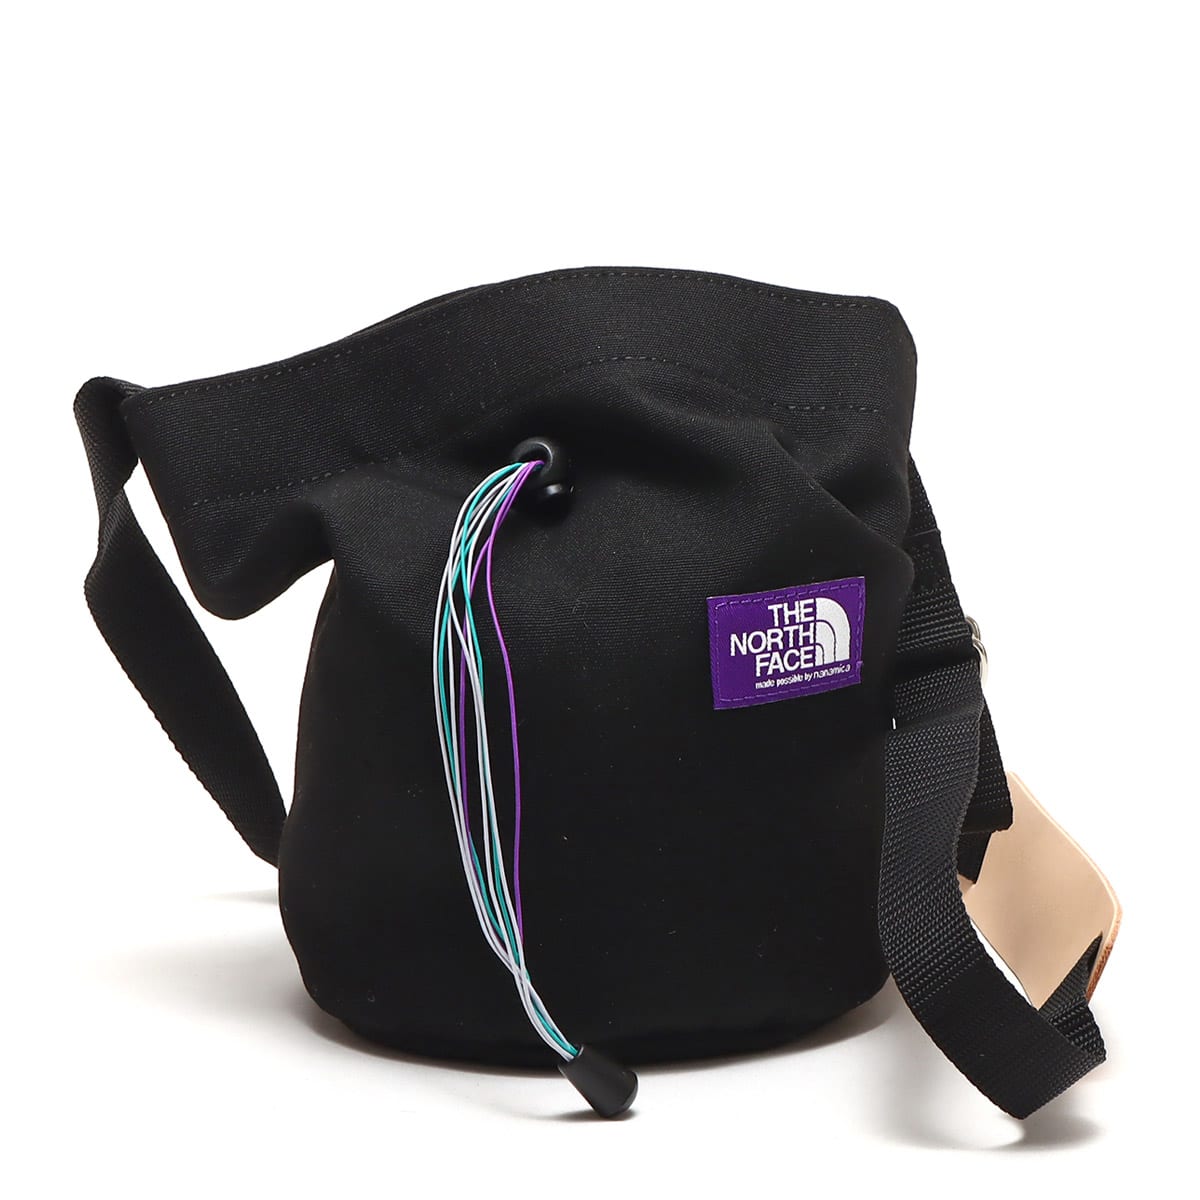 THE NORTH FACE PURPLE LABEL Stroll Bag Black 23SS-I